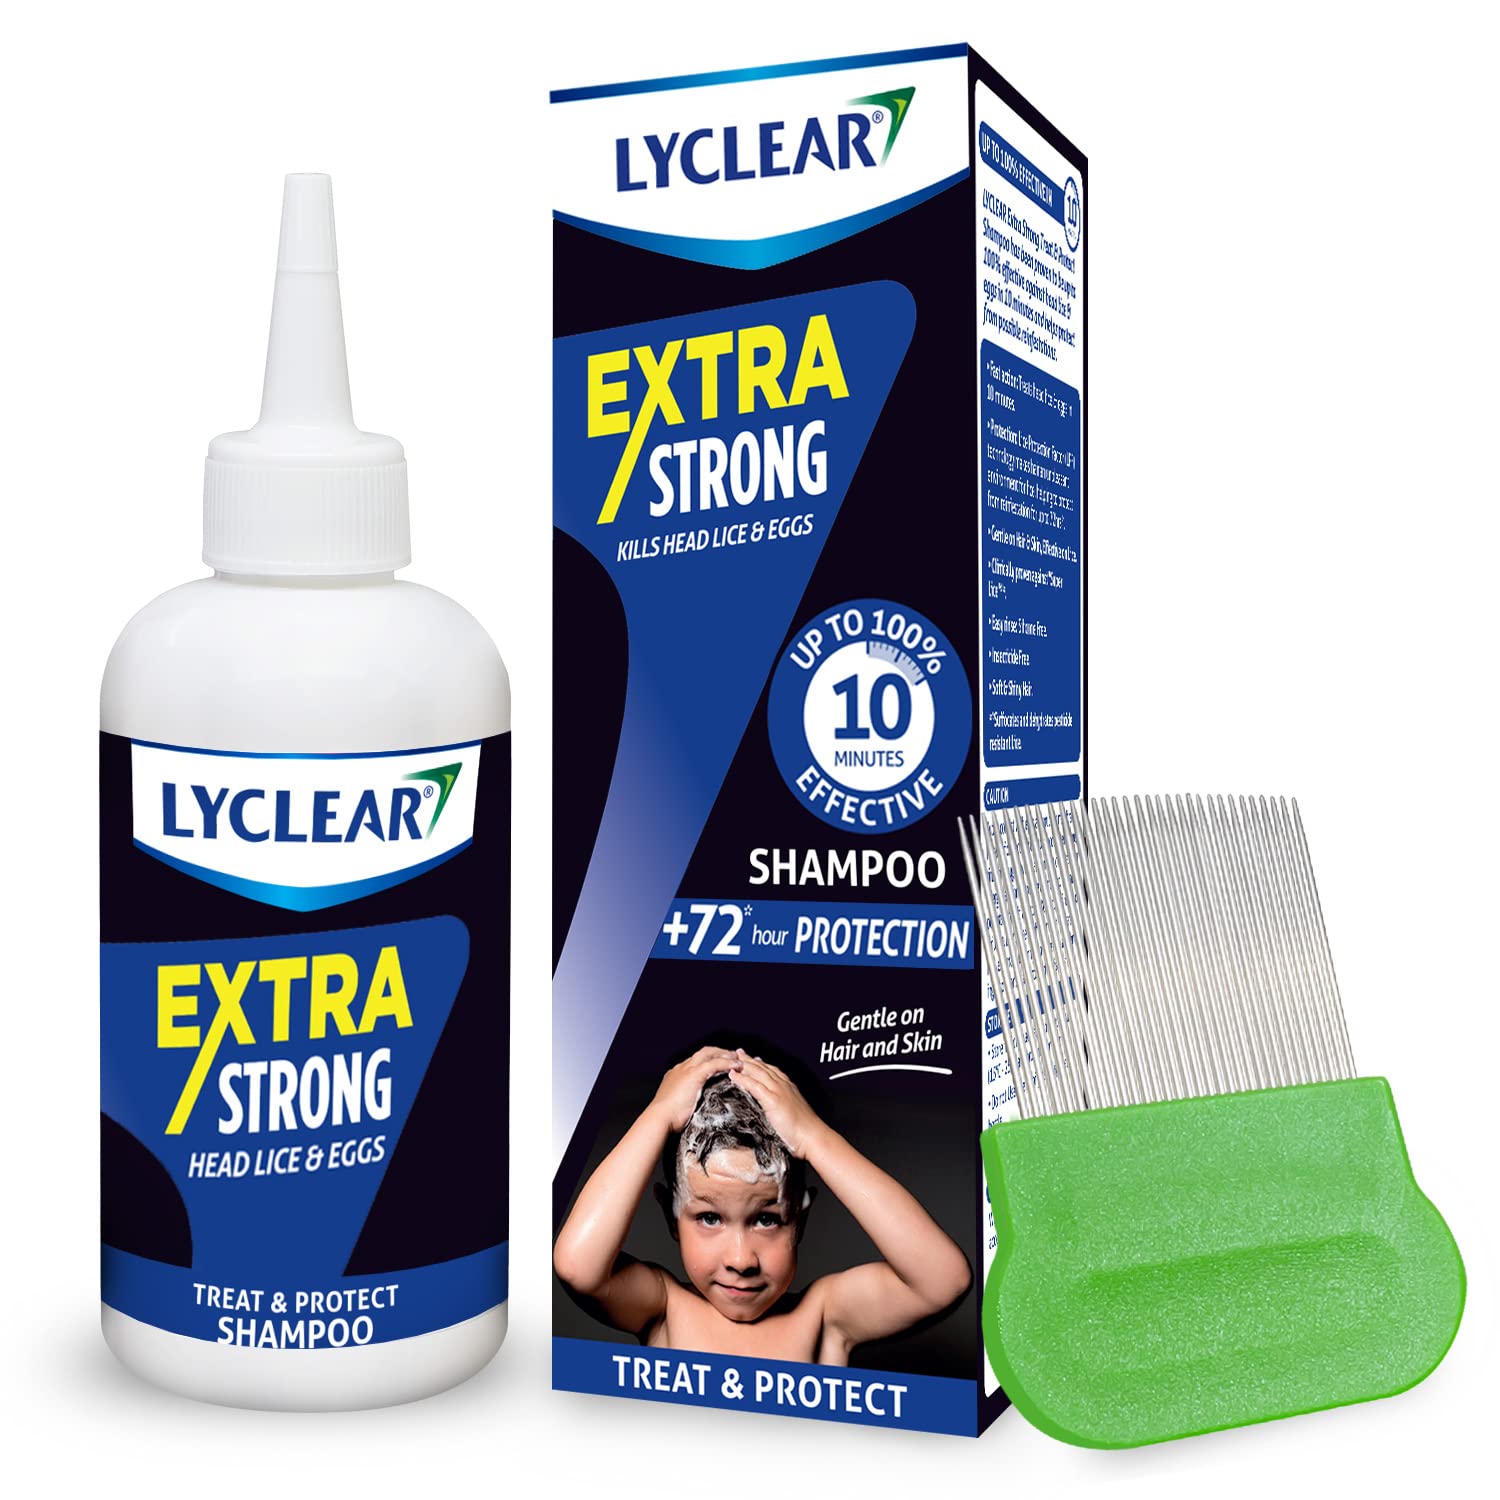 Lyclear Extra Strong Treat & Protect Shampoo - Kills Head Lice & Eggs – Effective in Just 10 minutes - Helps Protect for up-to 72 Hours* & Washes Hair – 200ml Shampoo Format